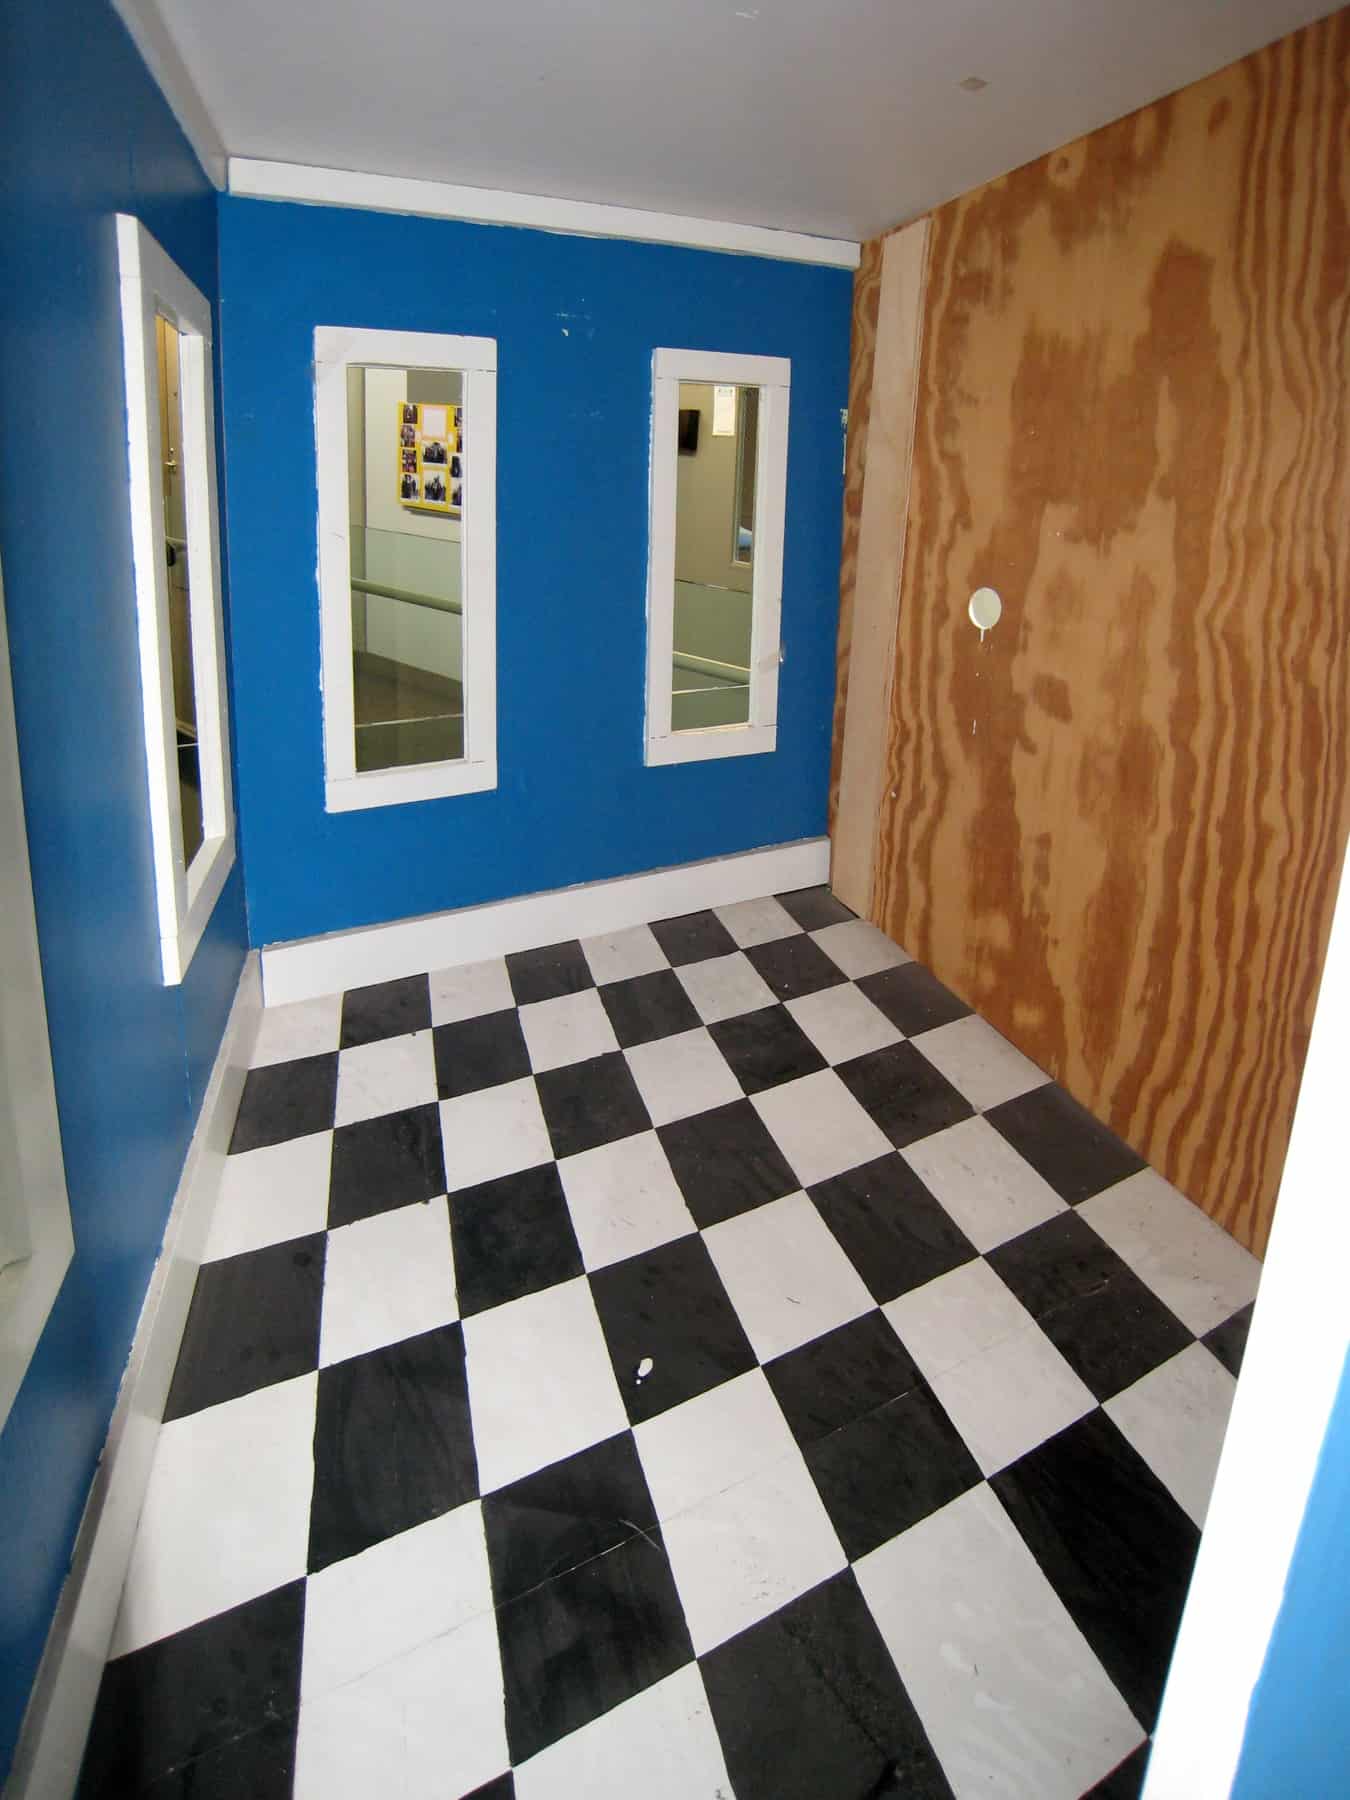 The Ames Room Illusion